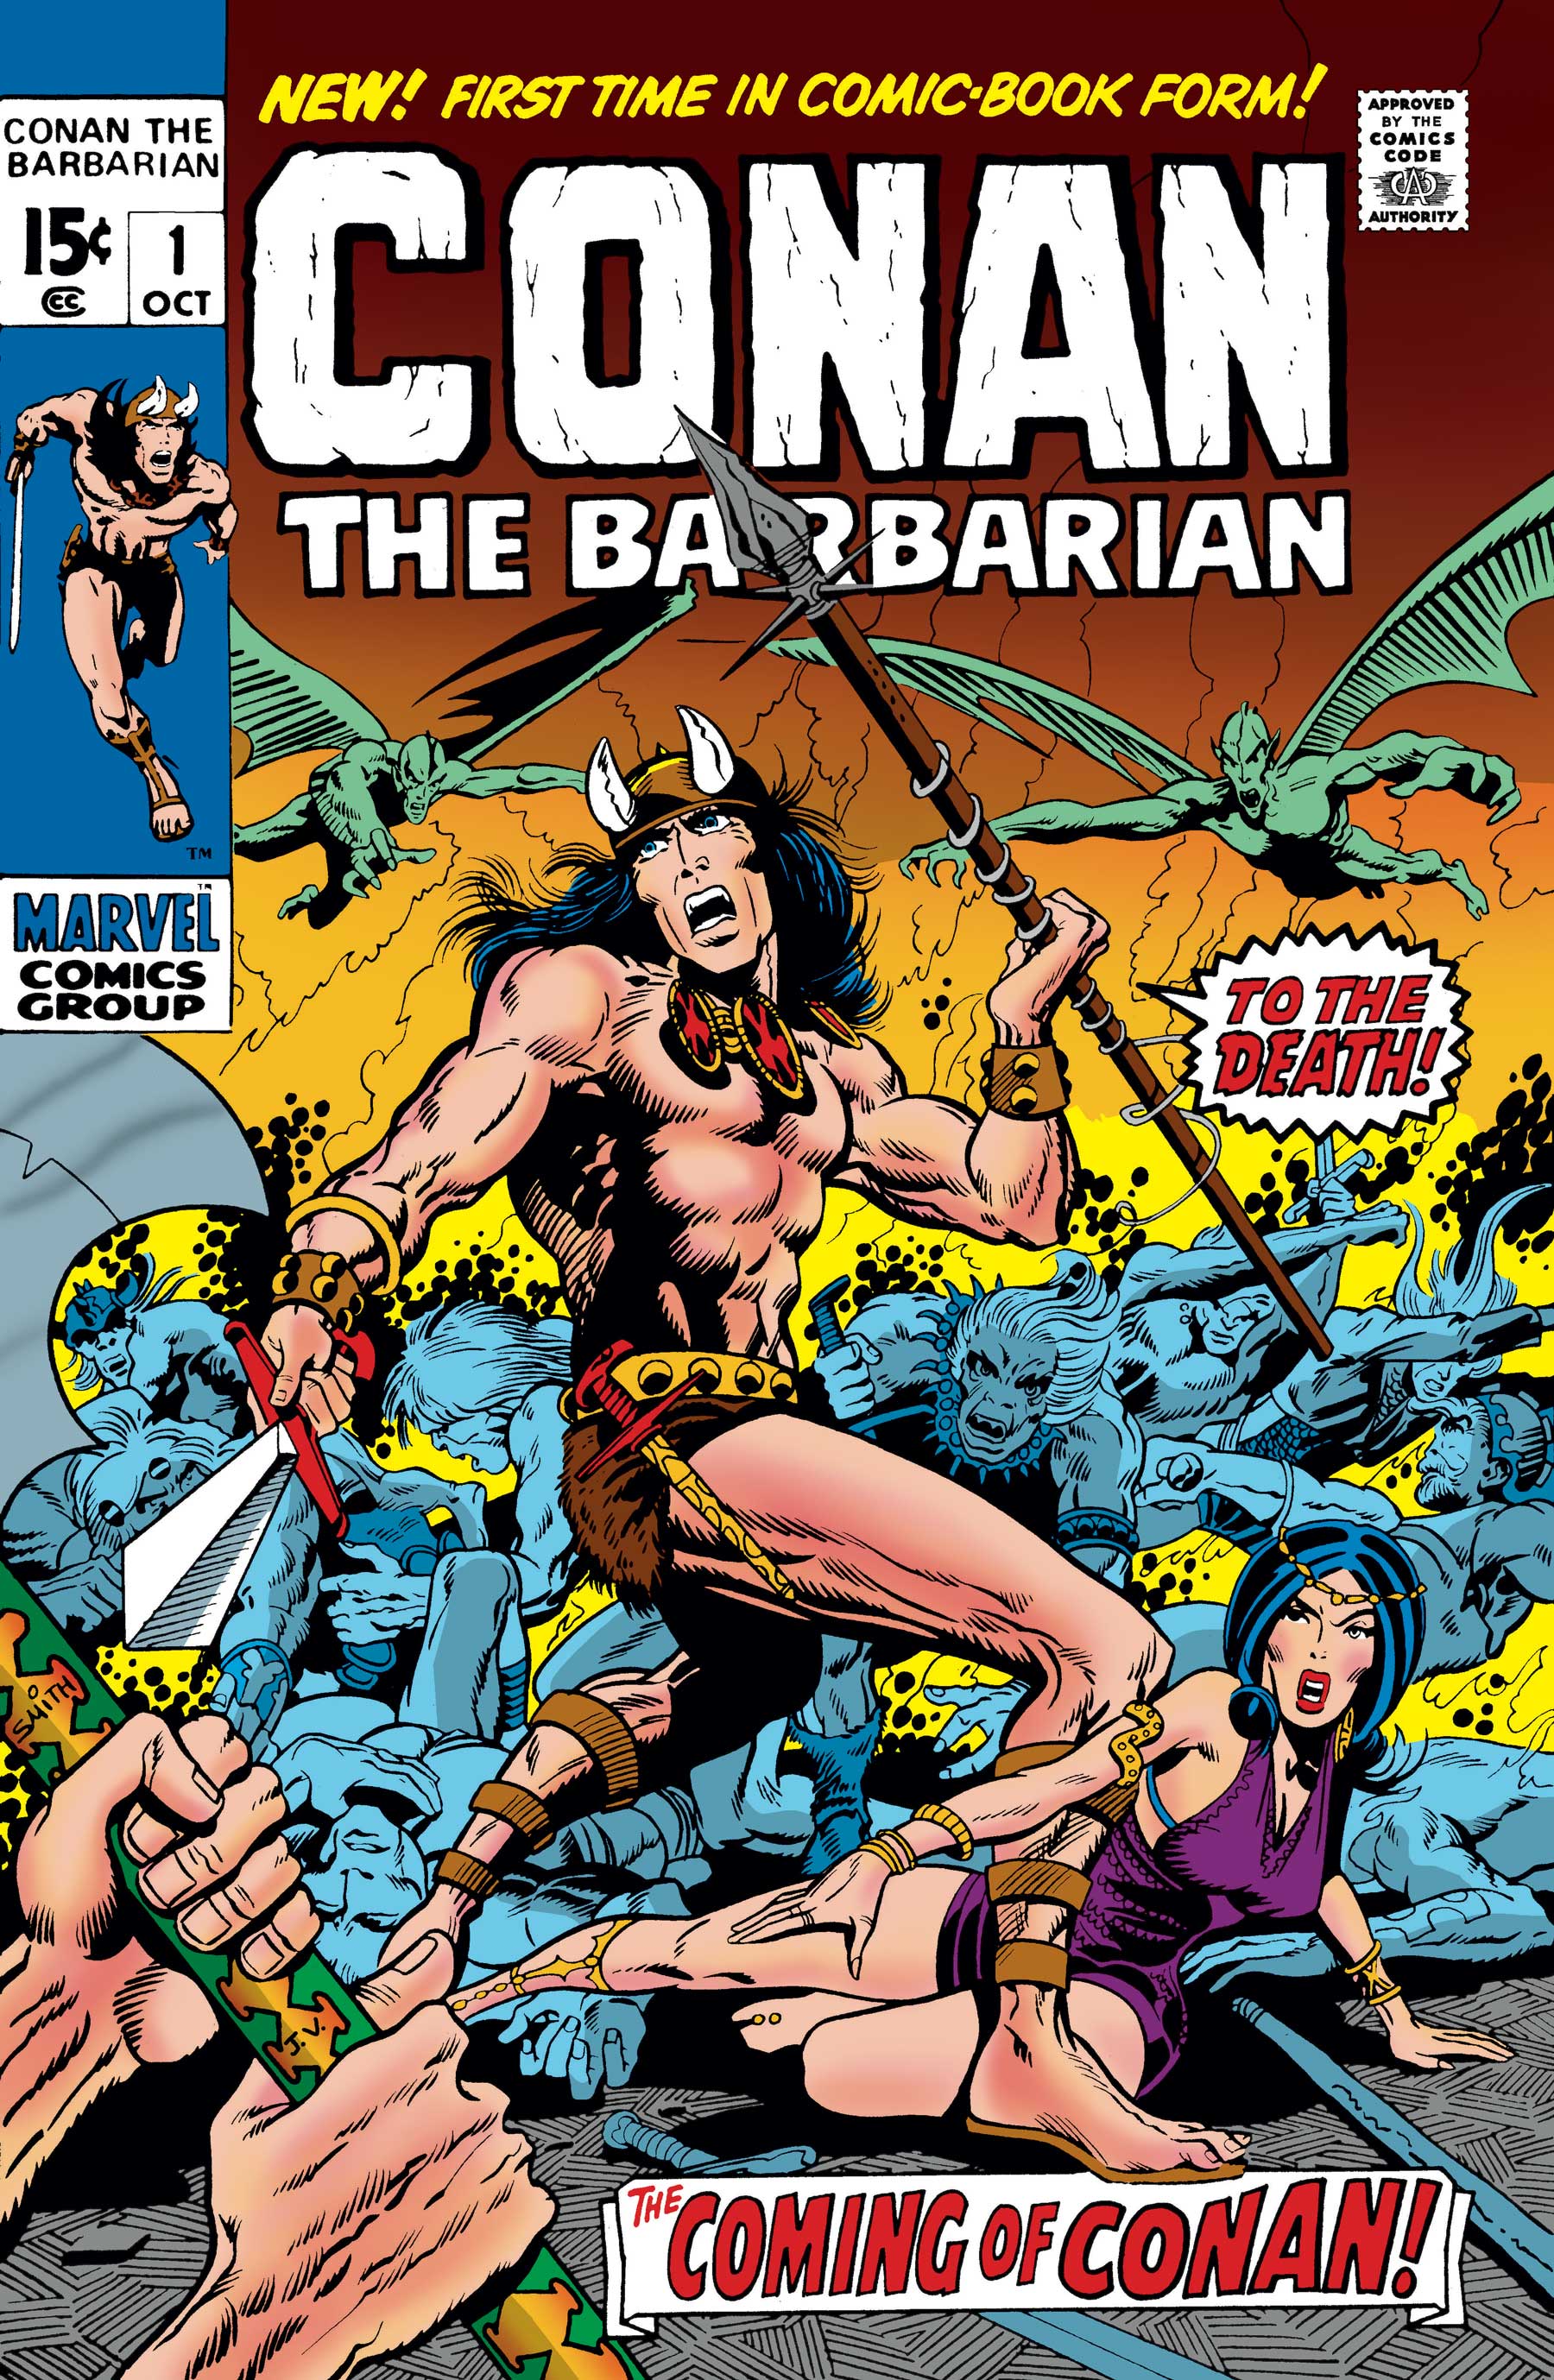 First Look: Conan the Barbarian: The Original Marvel Years Omnibus arrives January 2019